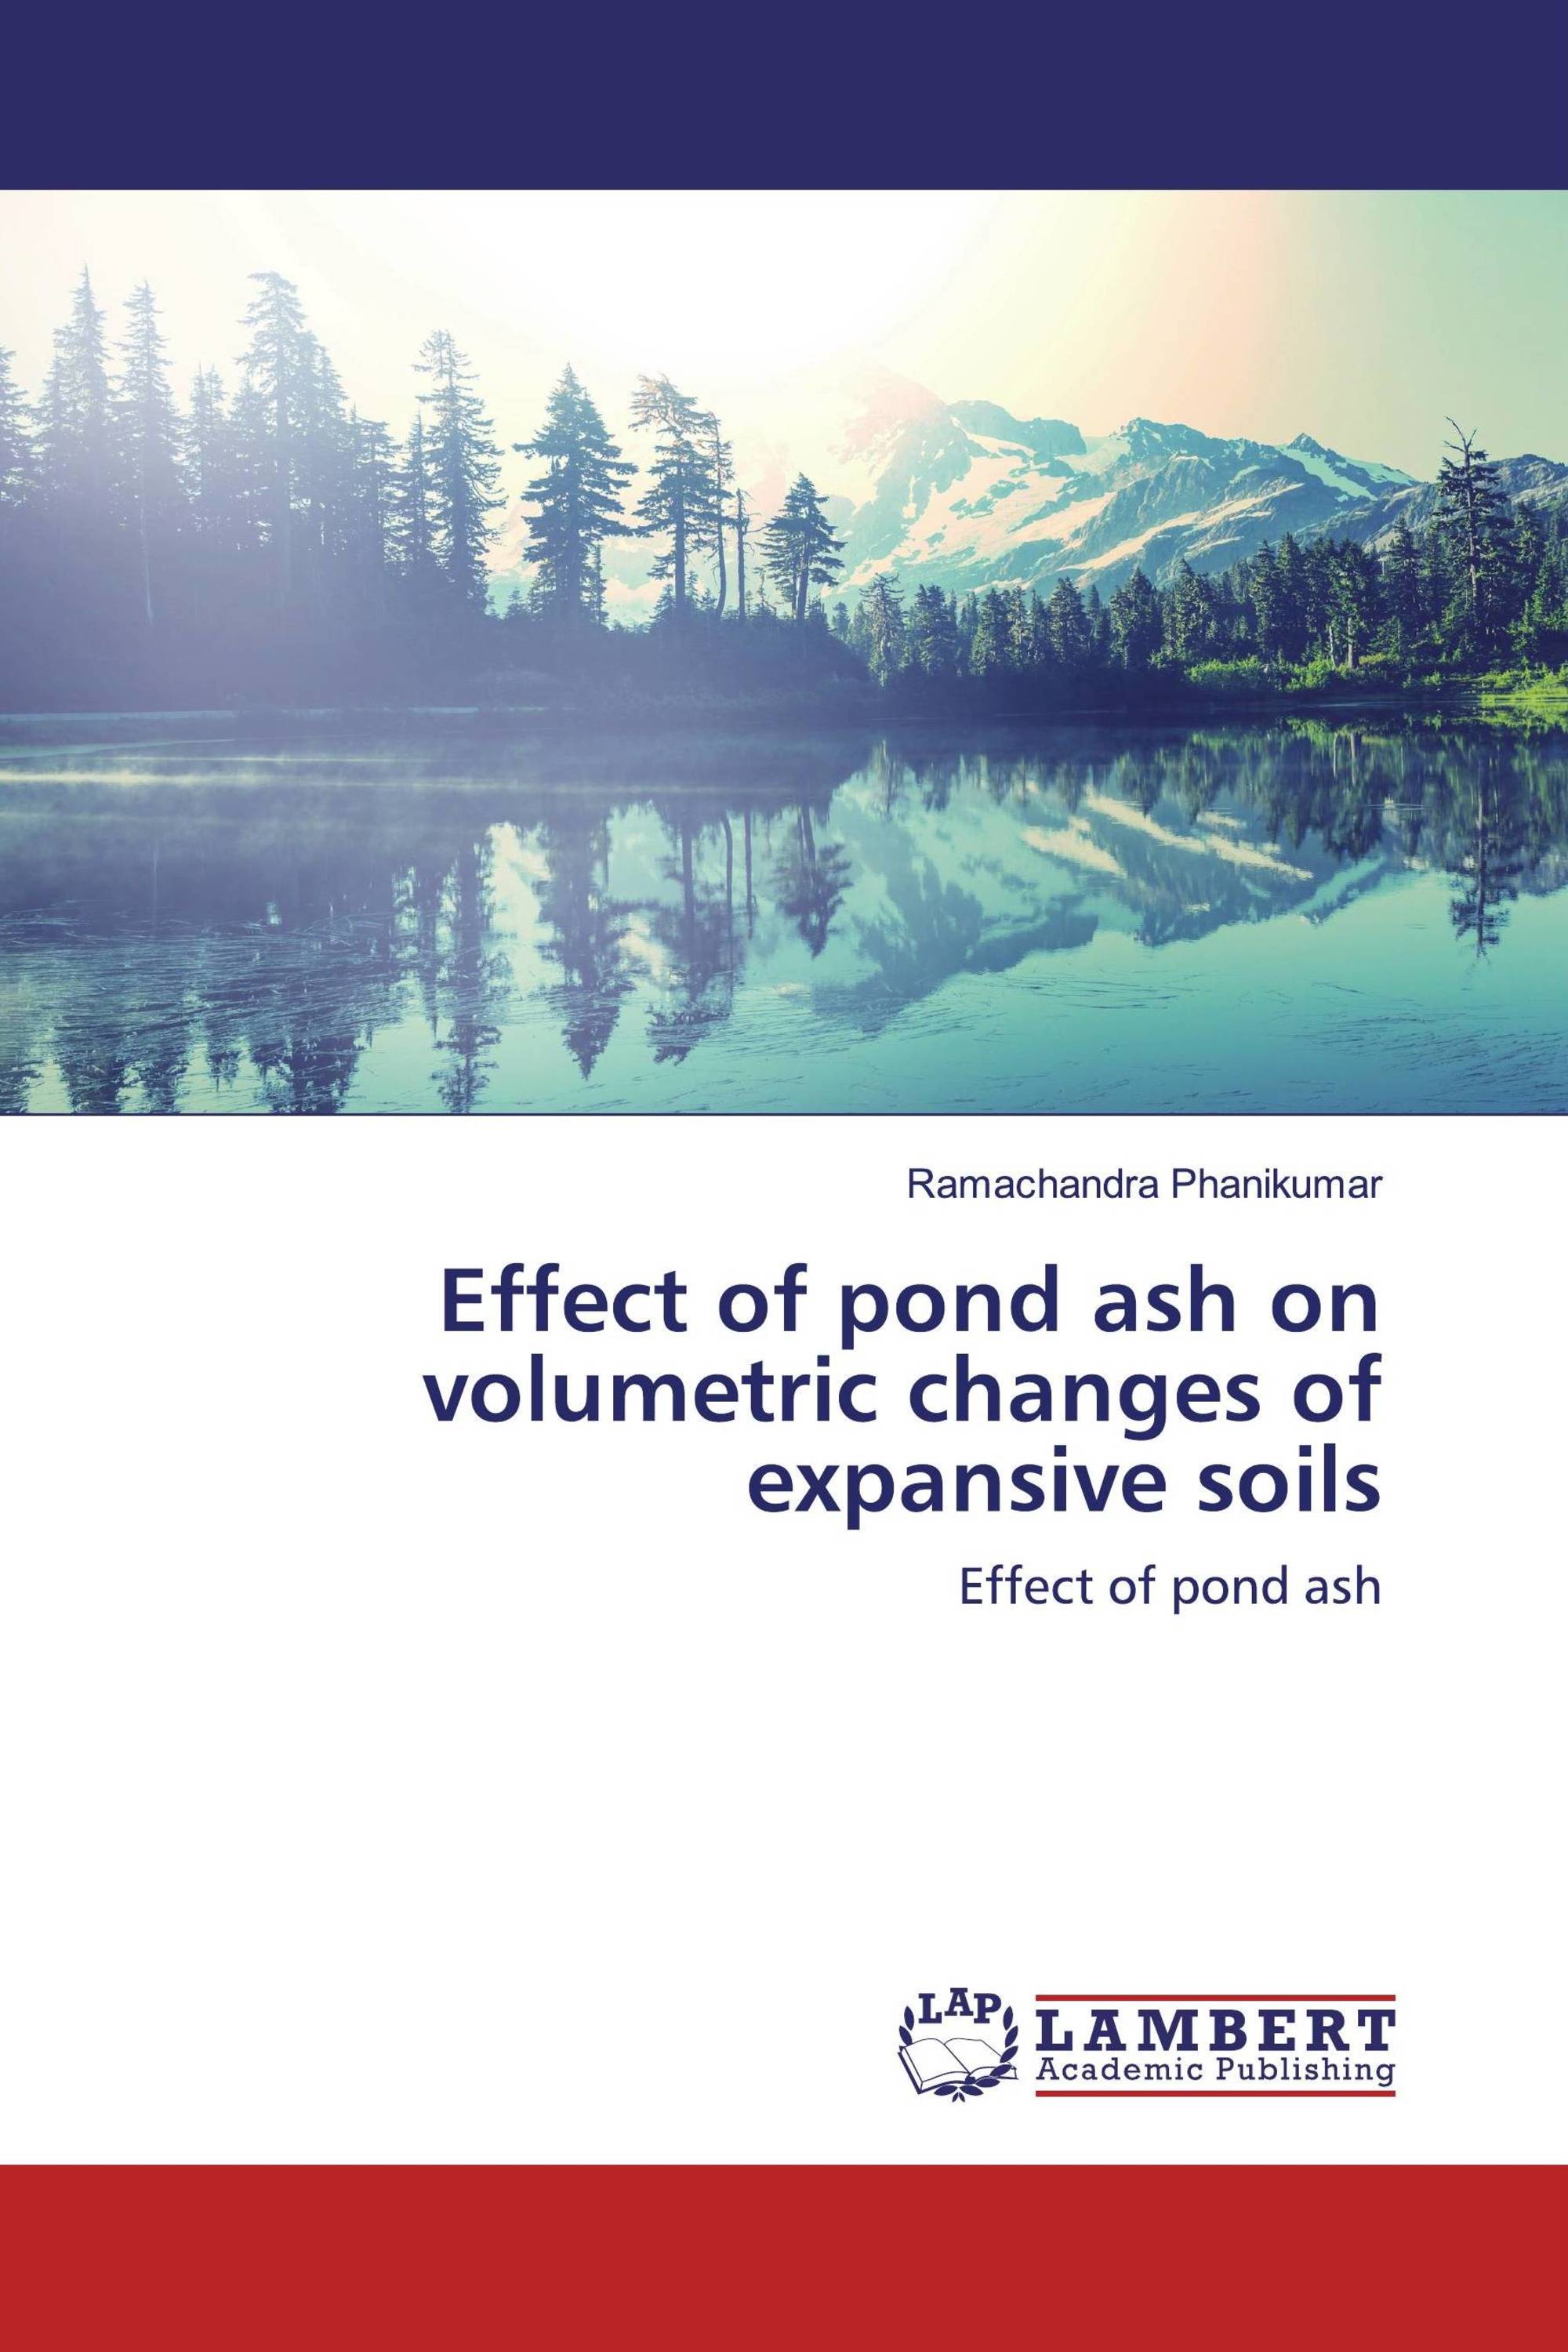 Effect of pond ash on volumetric changes of expansive soils